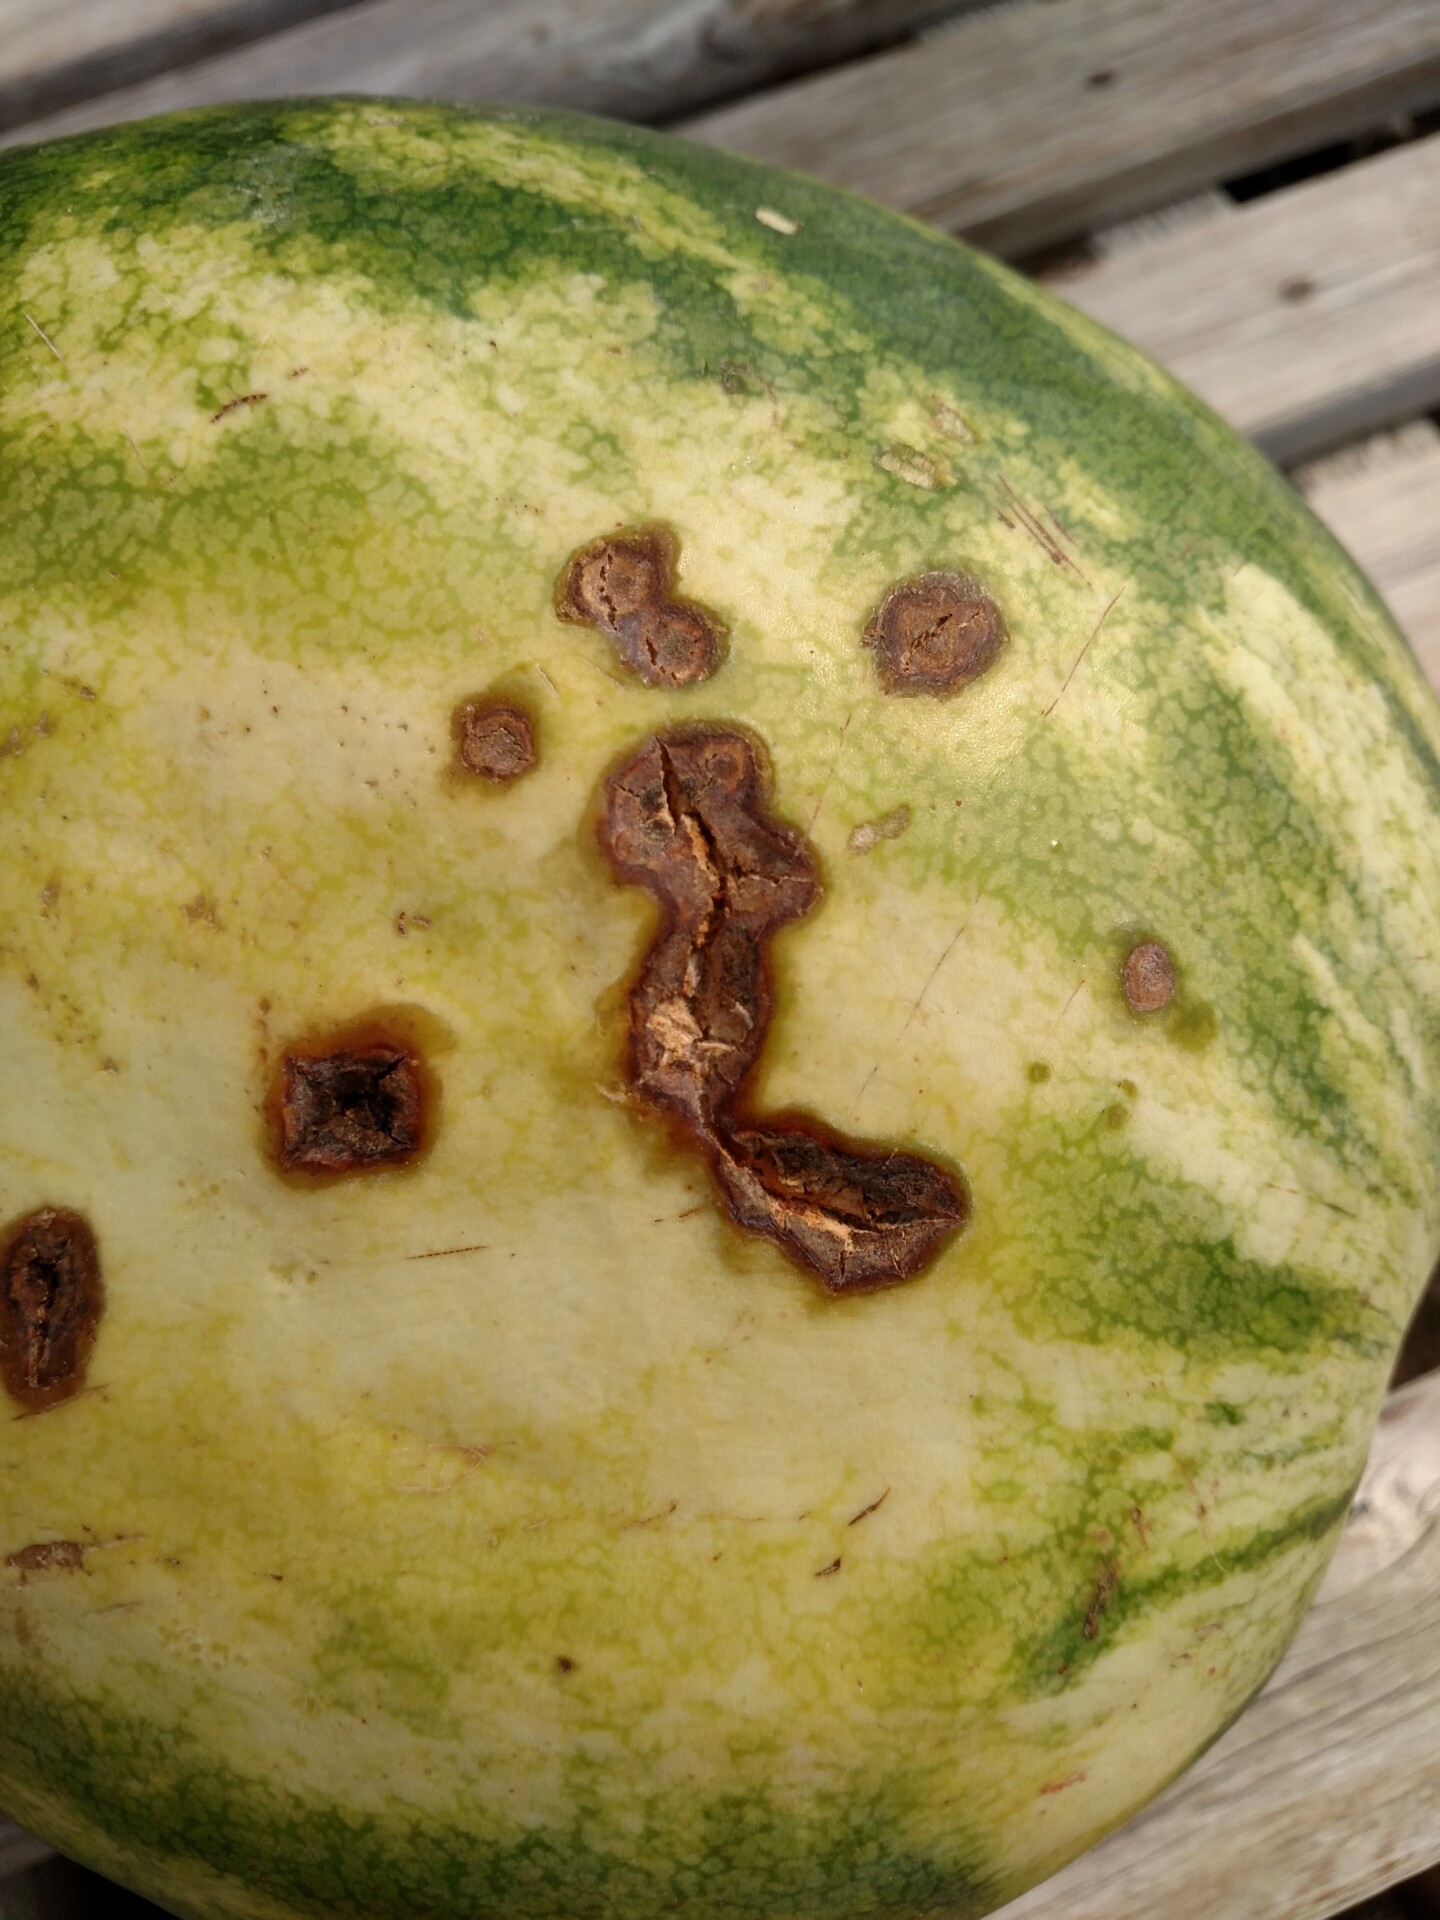 Figure 11. The anthracnose lesions on this watermelon fruit appear more as cracks than pit-like as in other photos.